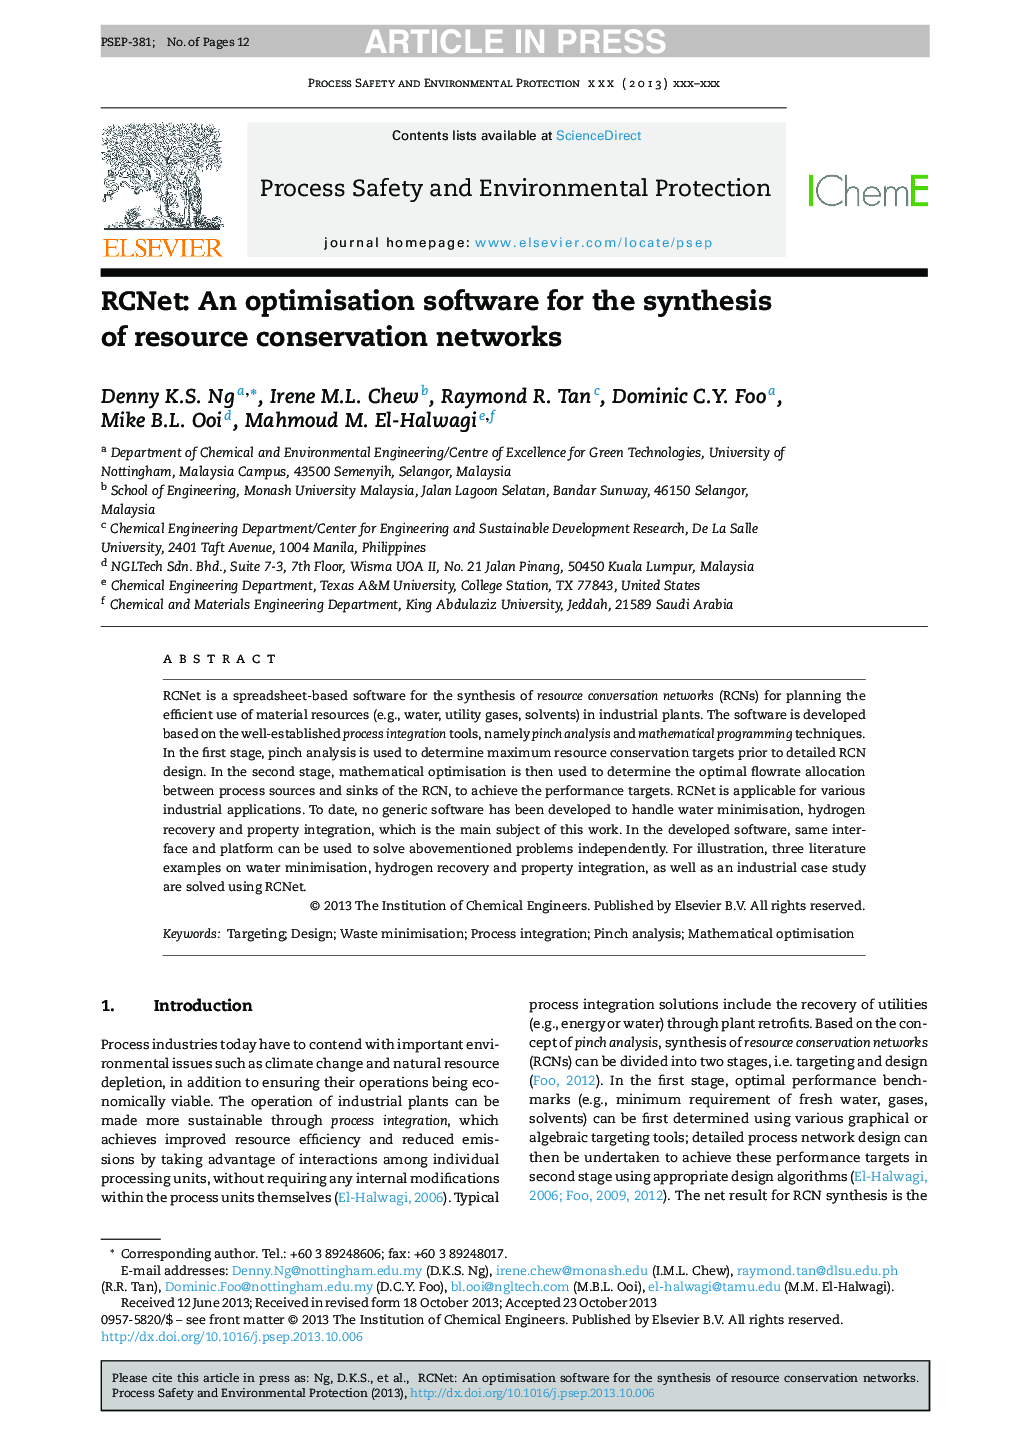 RCNet: An optimisation software for the synthesis of resource conservation networks